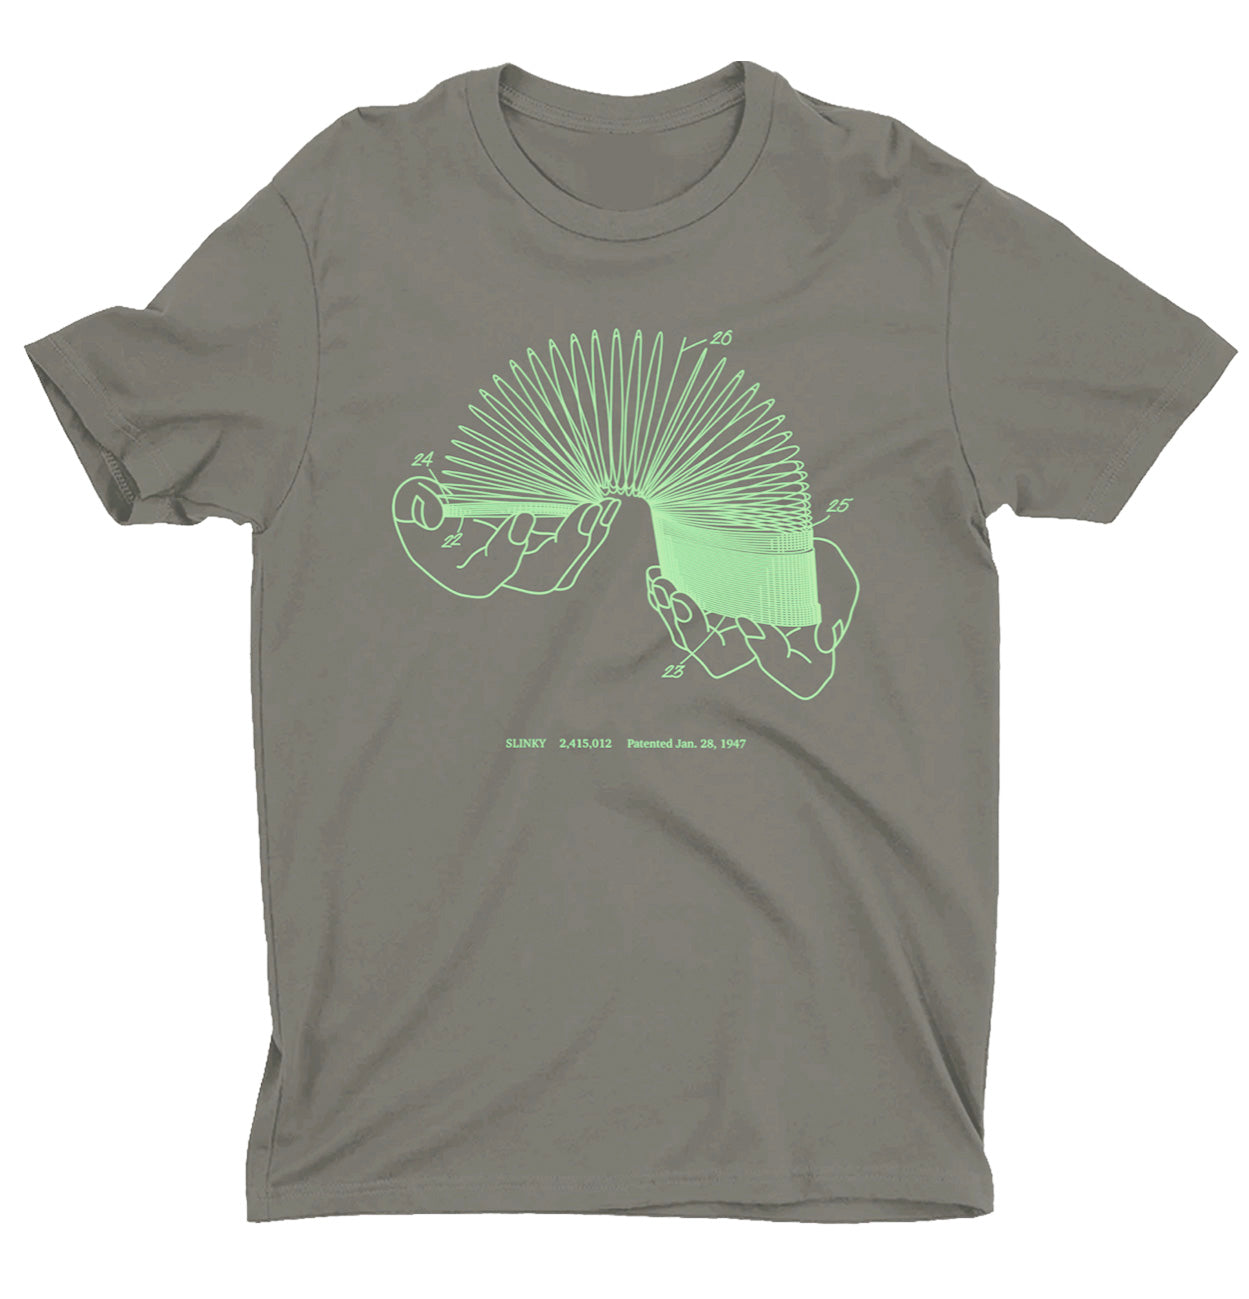 Charcoal Vernakular Ink + Sea T-shirt - Foam with Photo - Green Patent Slinky Project - Designs